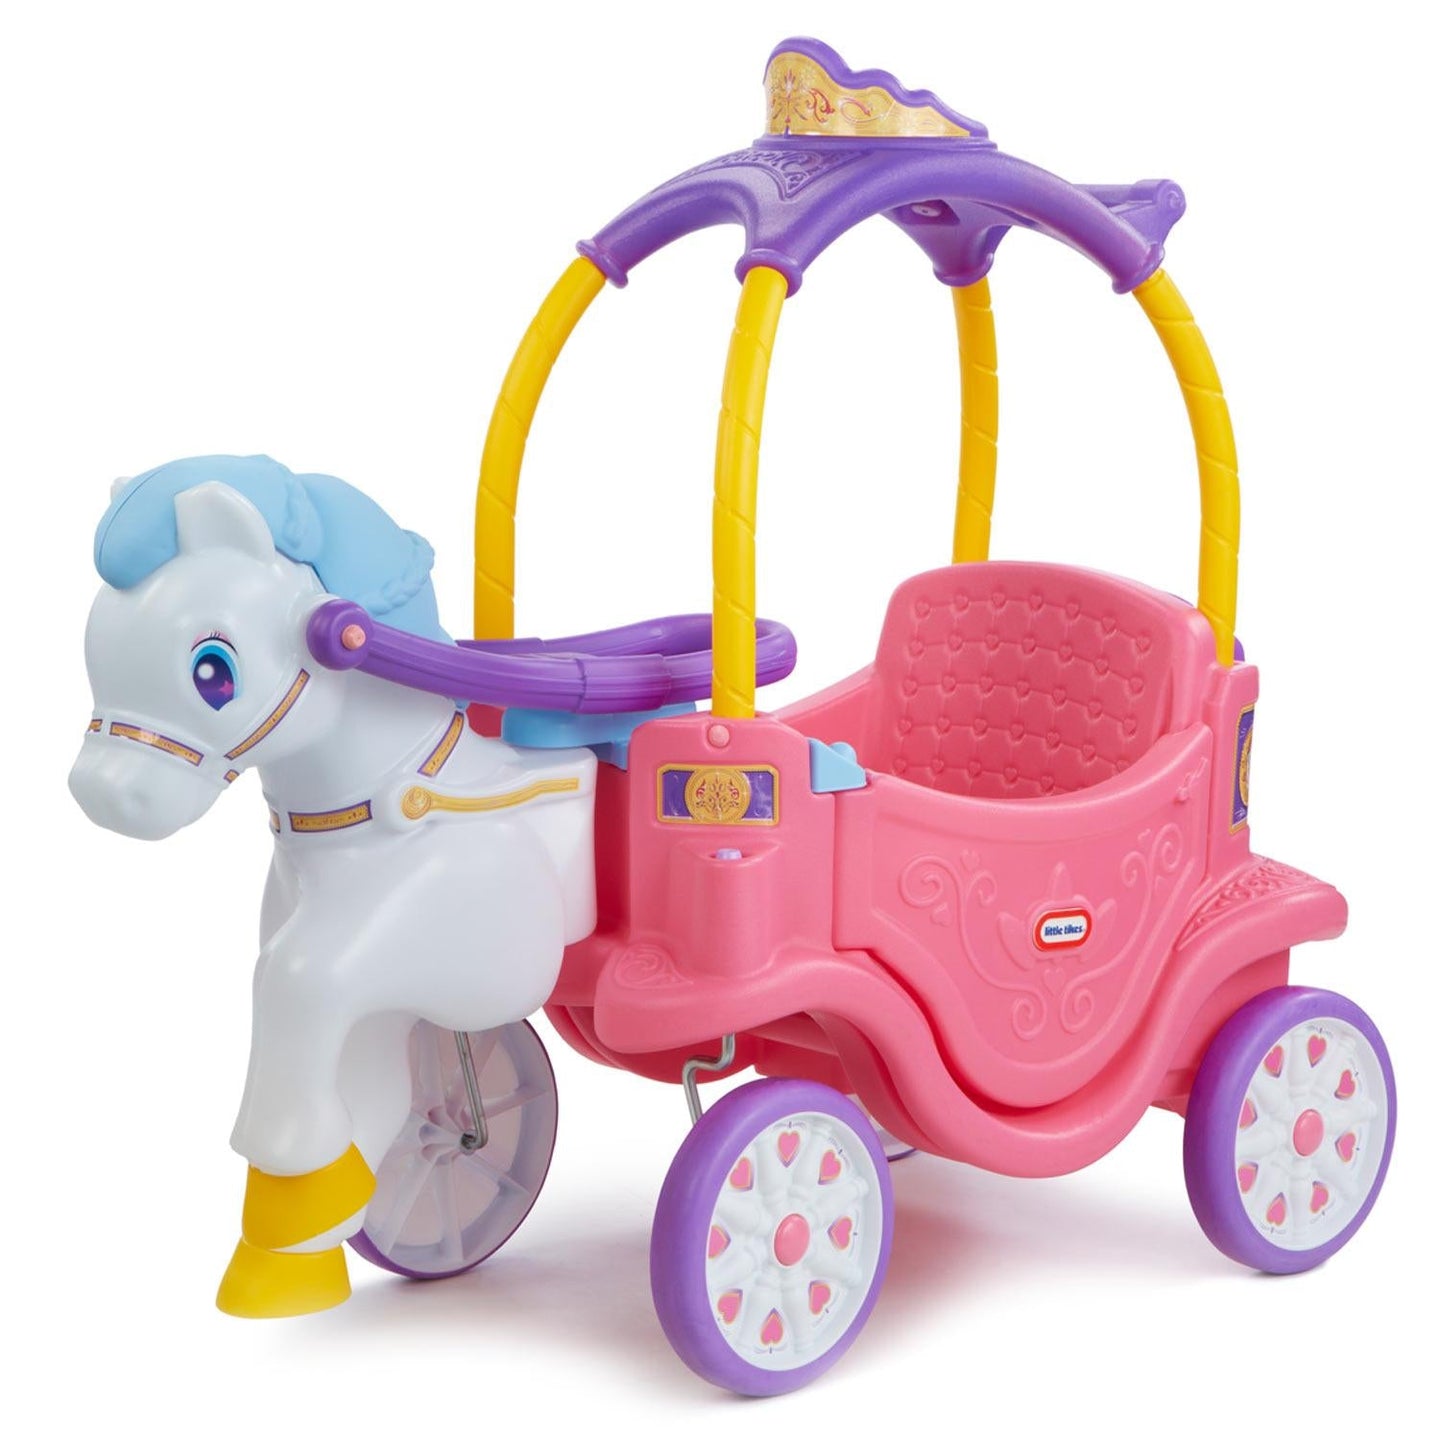 Little Smoby Baby Pony Carriage